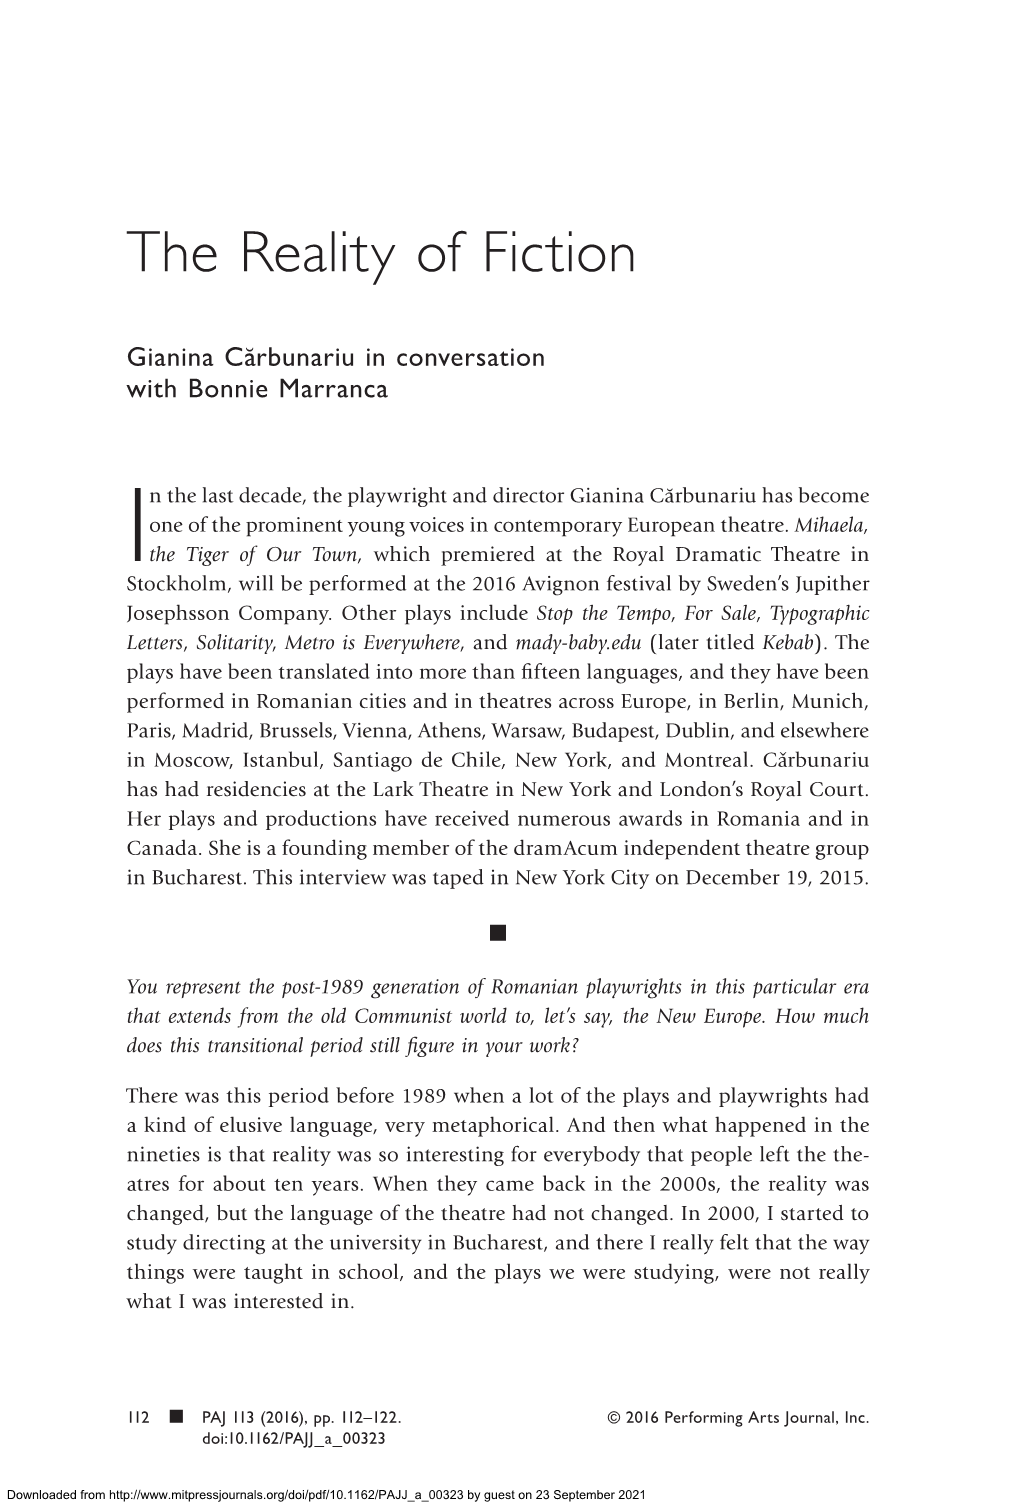 The Reality of Fiction